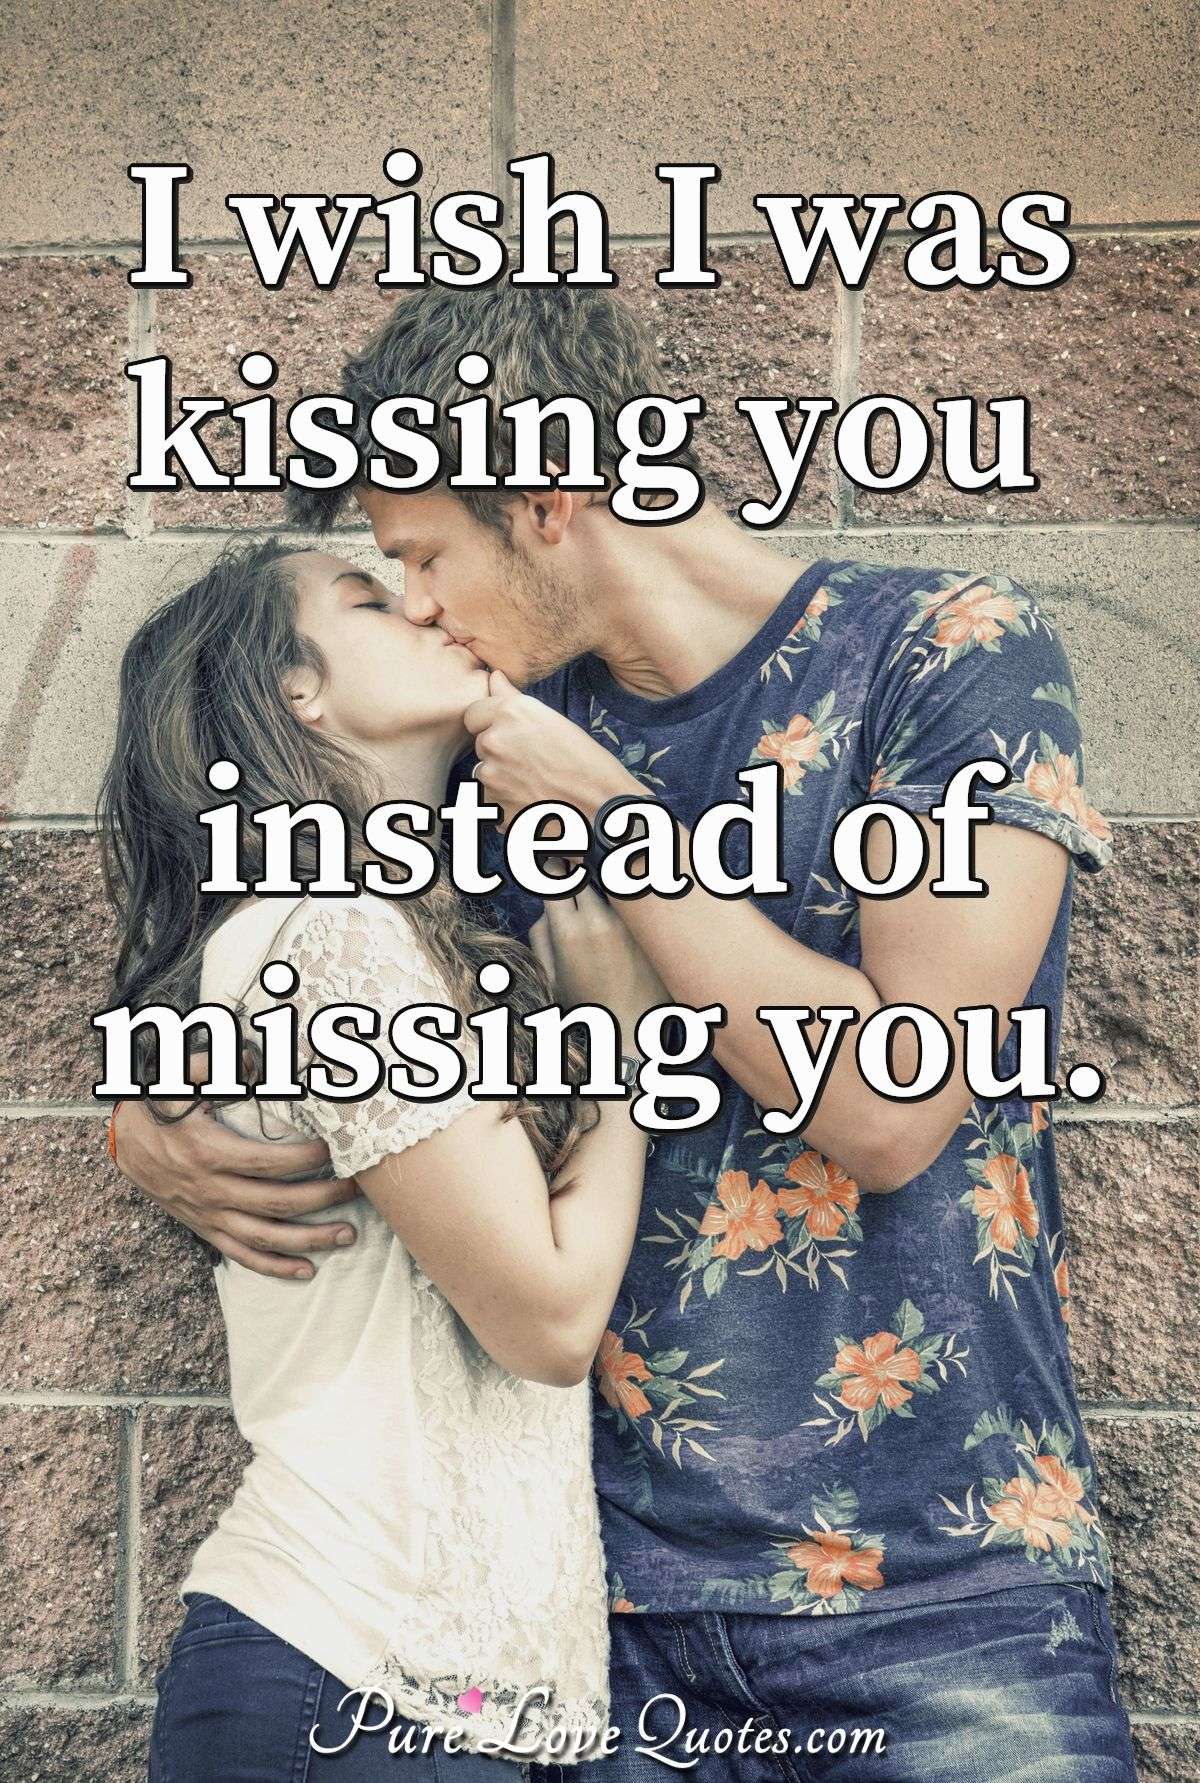 I wish I was kissing you instead of missing you. - Anonymous